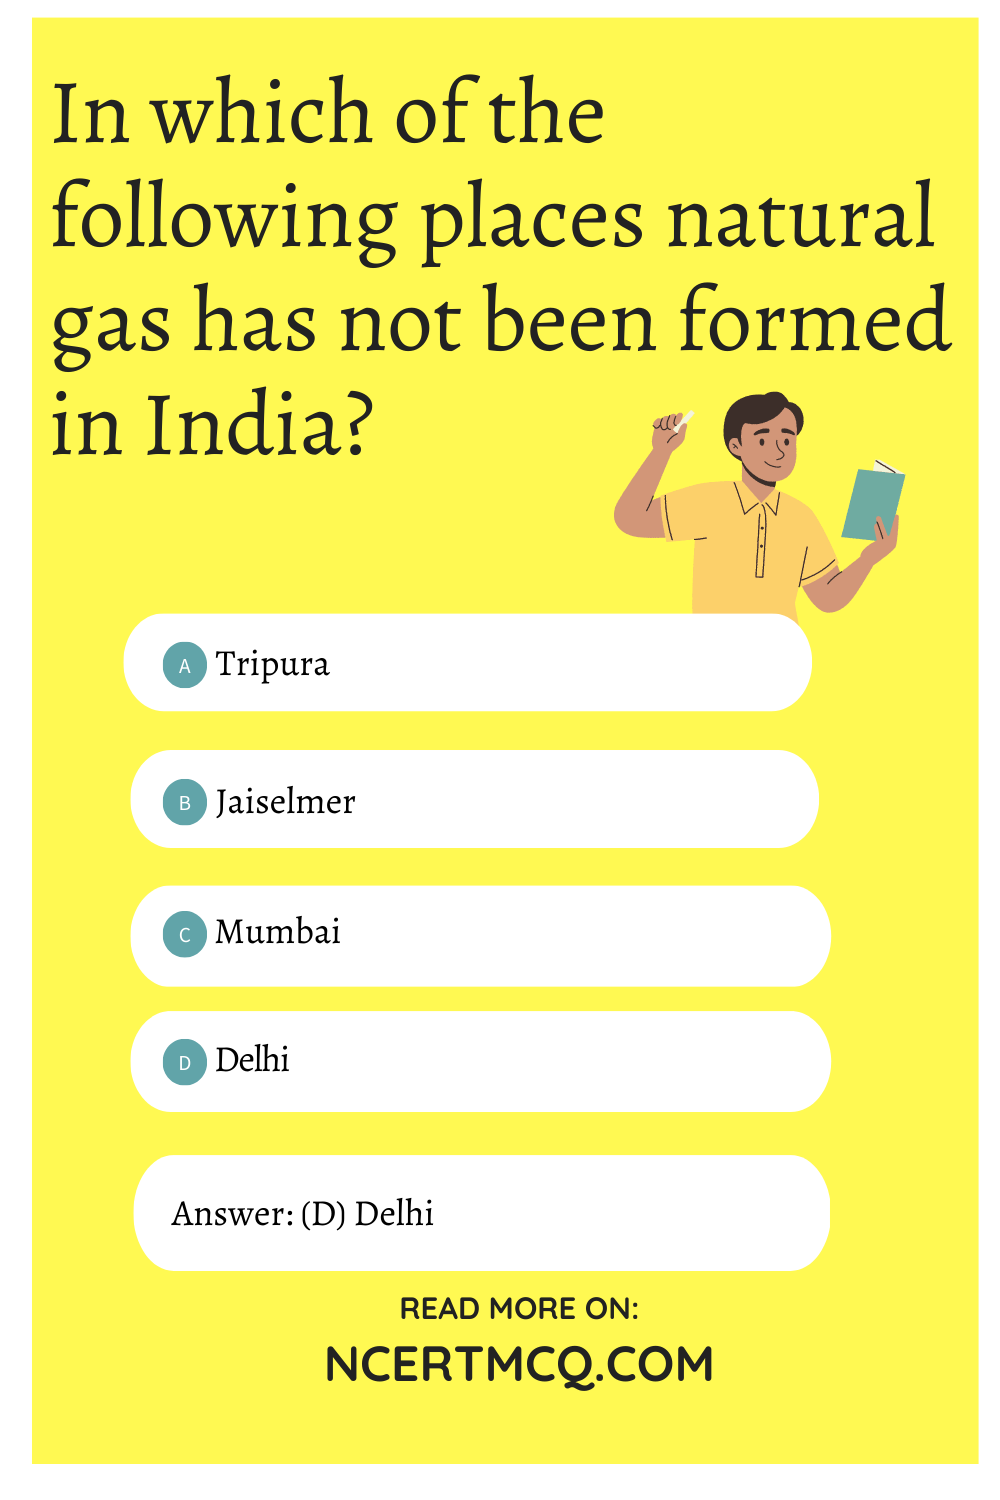 In which of the following places natural gas has not been formed in India?